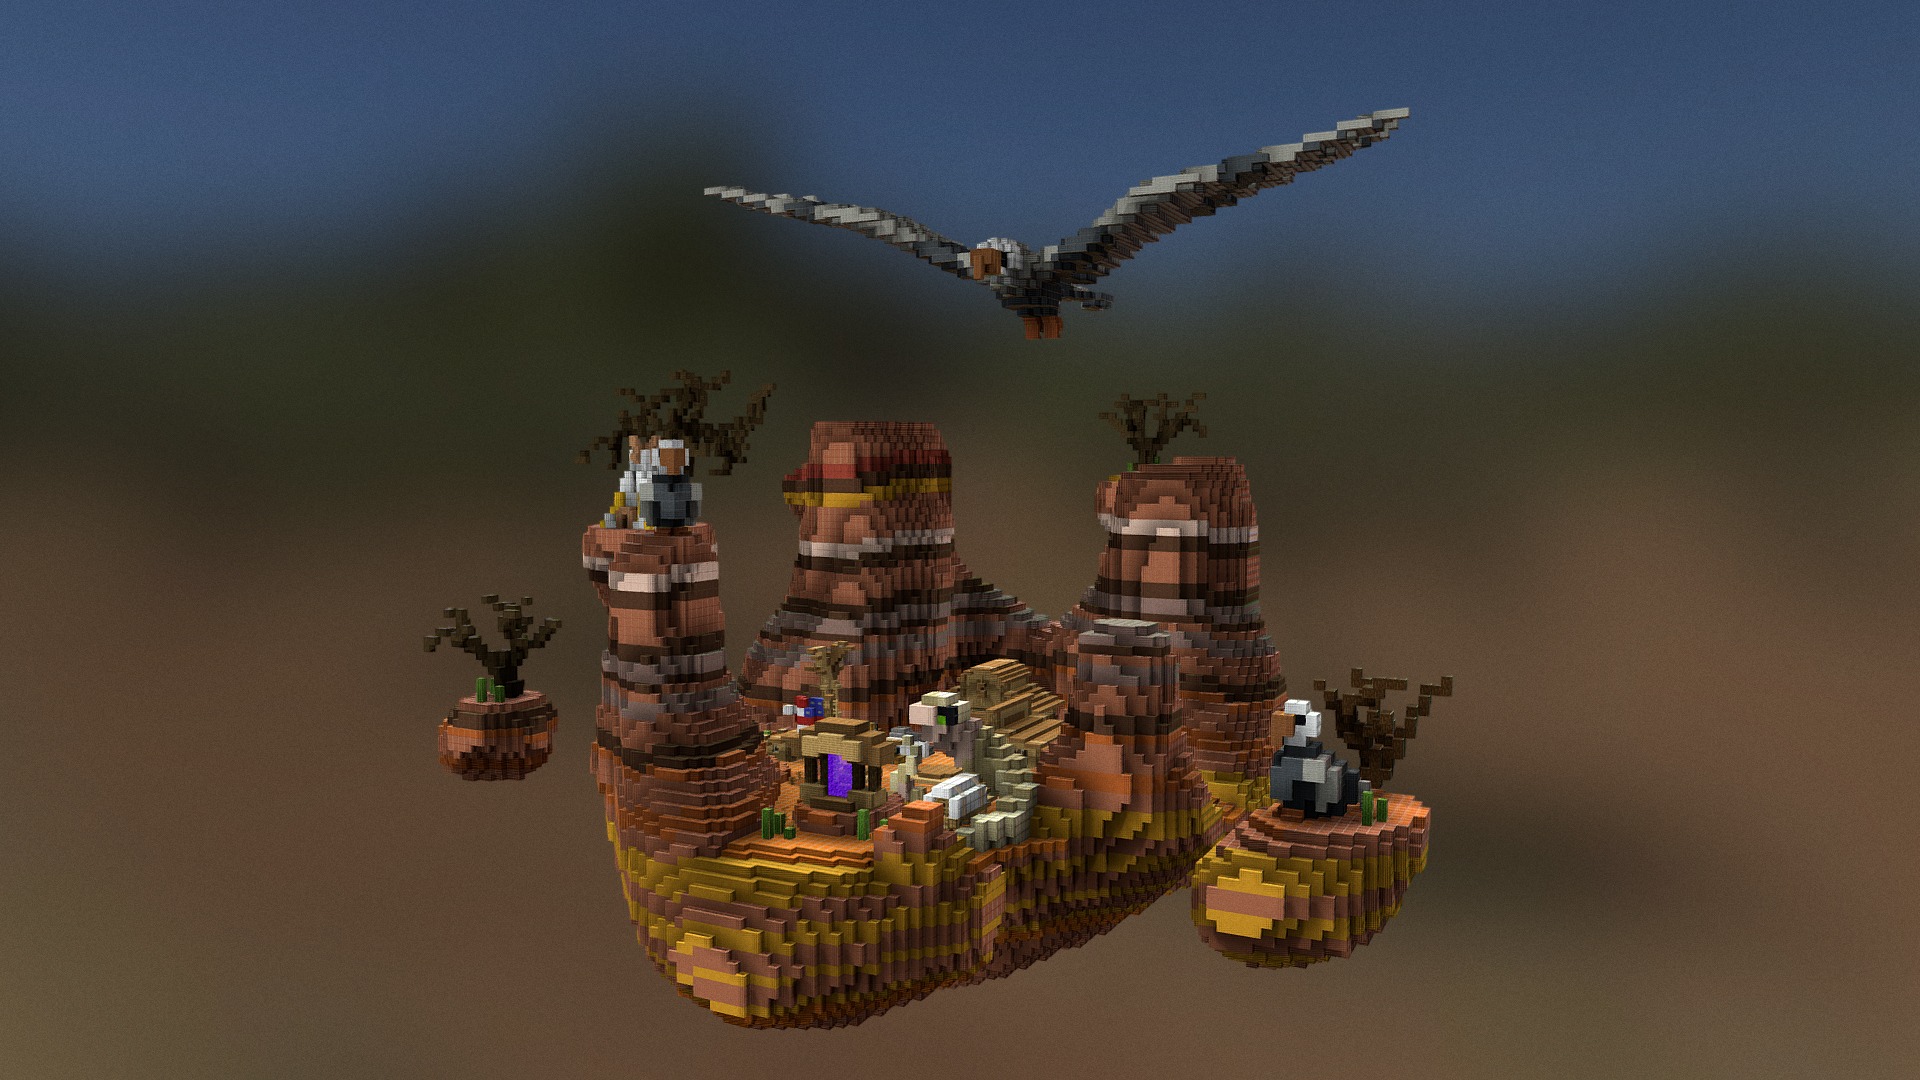 3D model Western compact Spawn/Lobby - This is a 3D model of the Western compact Spawn/Lobby. The 3D model is about a model of a city.